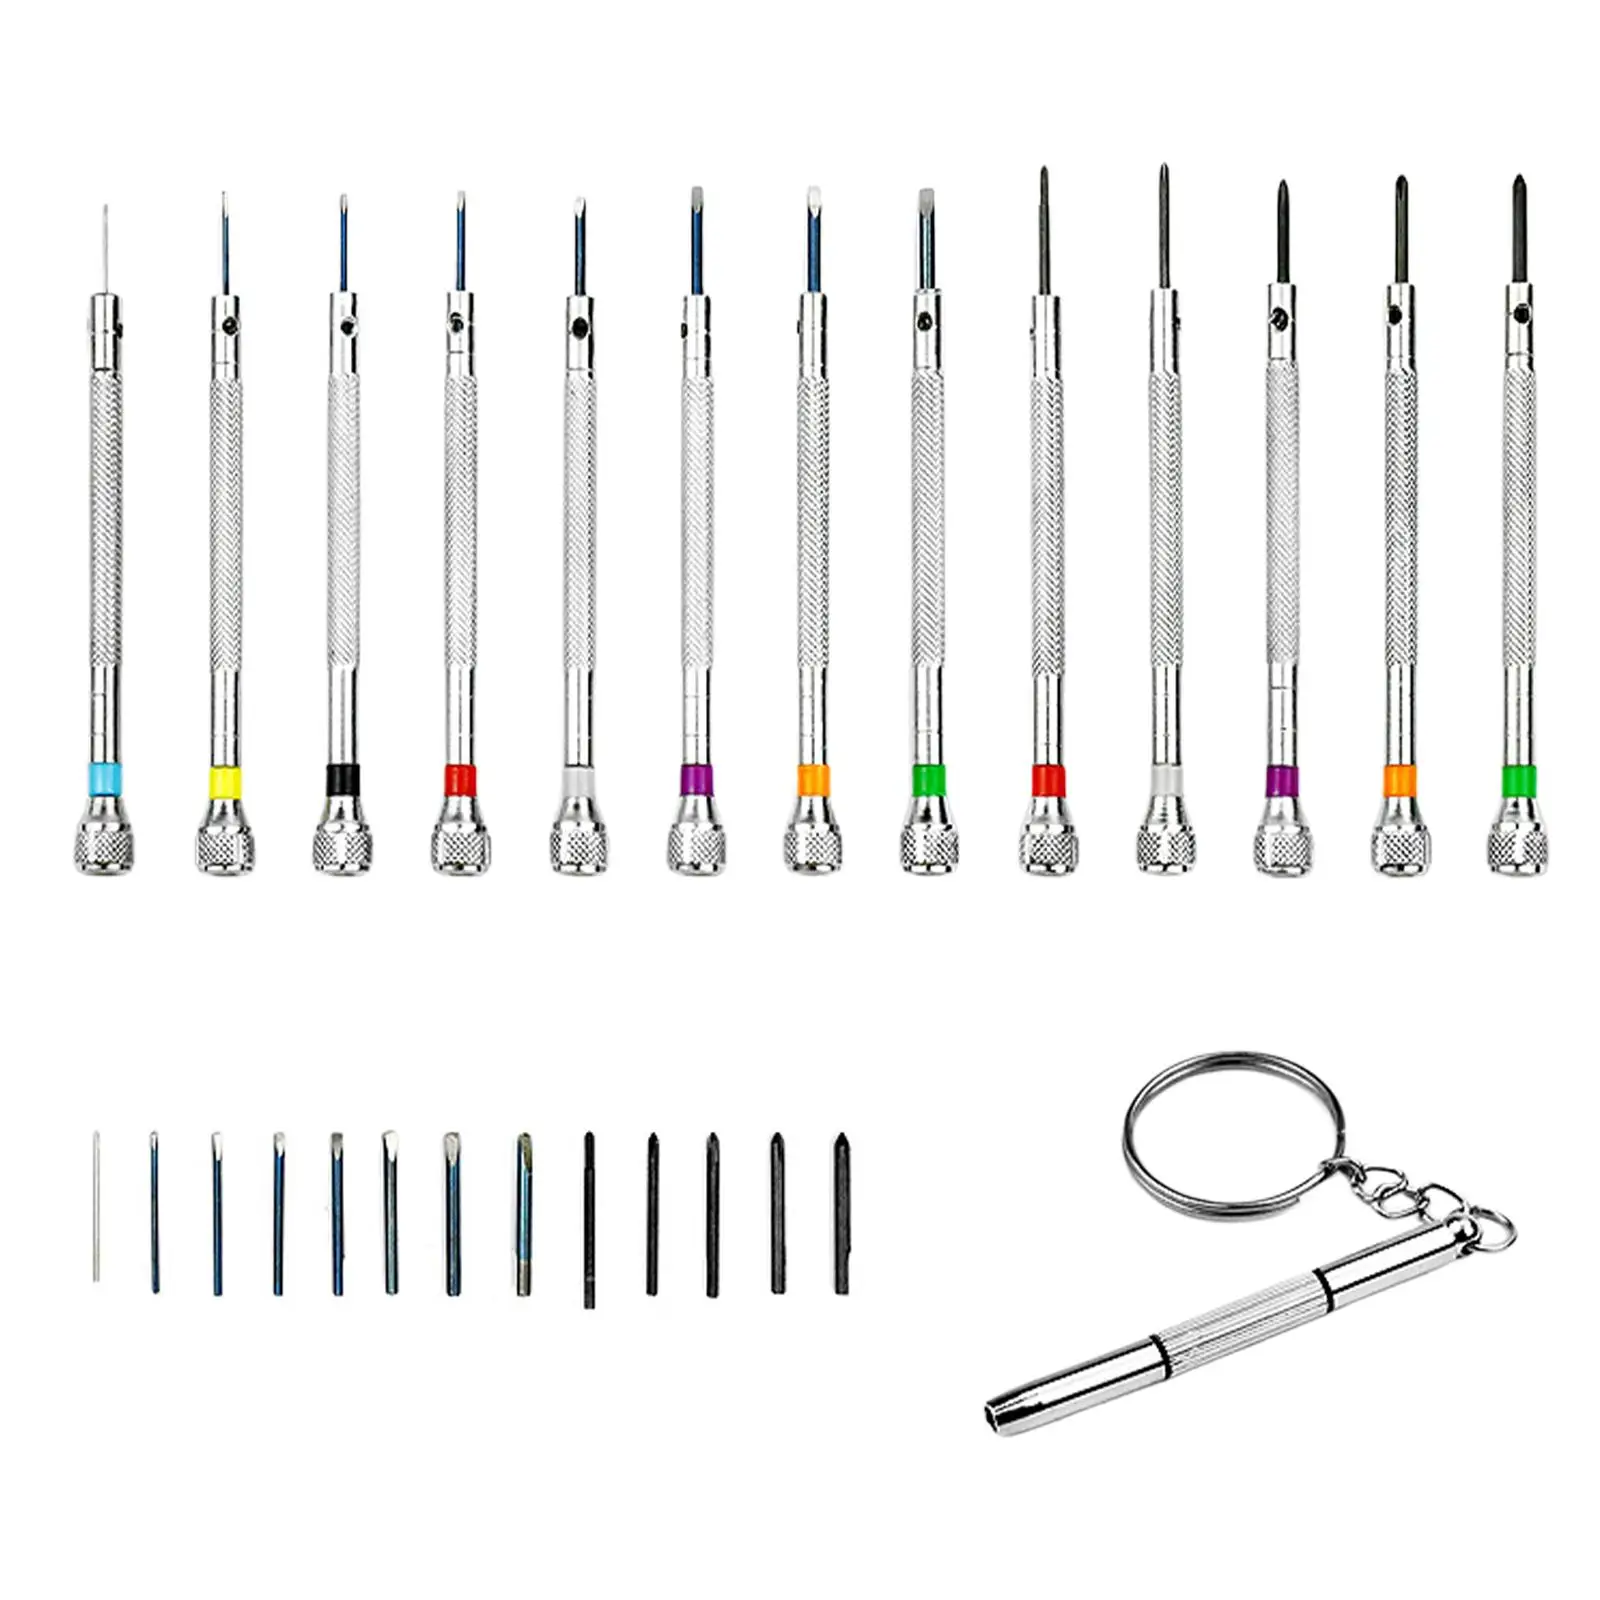 13 Pieces Watch Repair Screwdriver Set Premium Mini Watchmaker Home Sturdy for Watch Electronices Laptop Jewelers Repair Parts